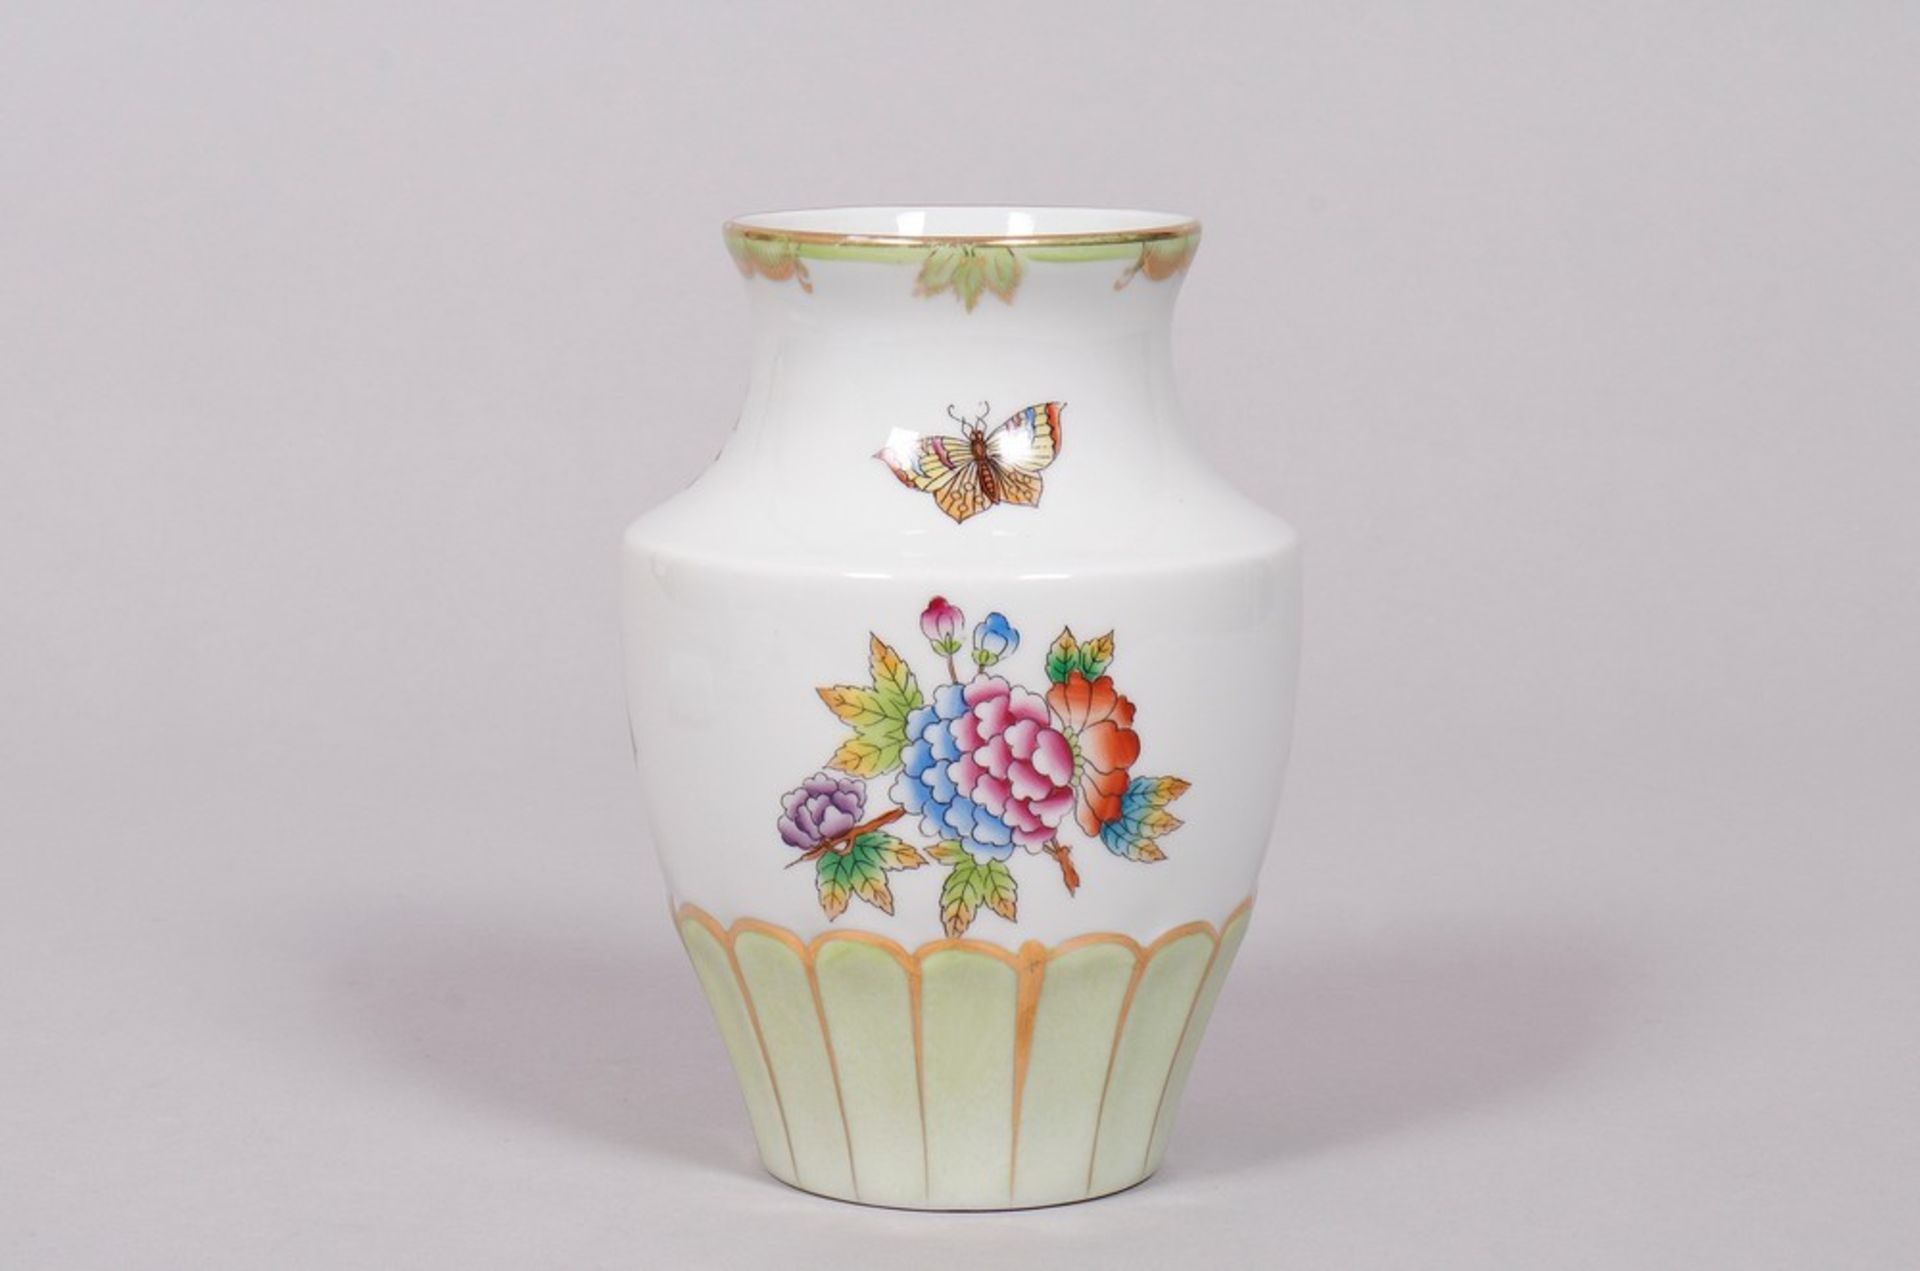 Vase, Herend, Hungary, "Victoria" decor with light green base, 20th C.